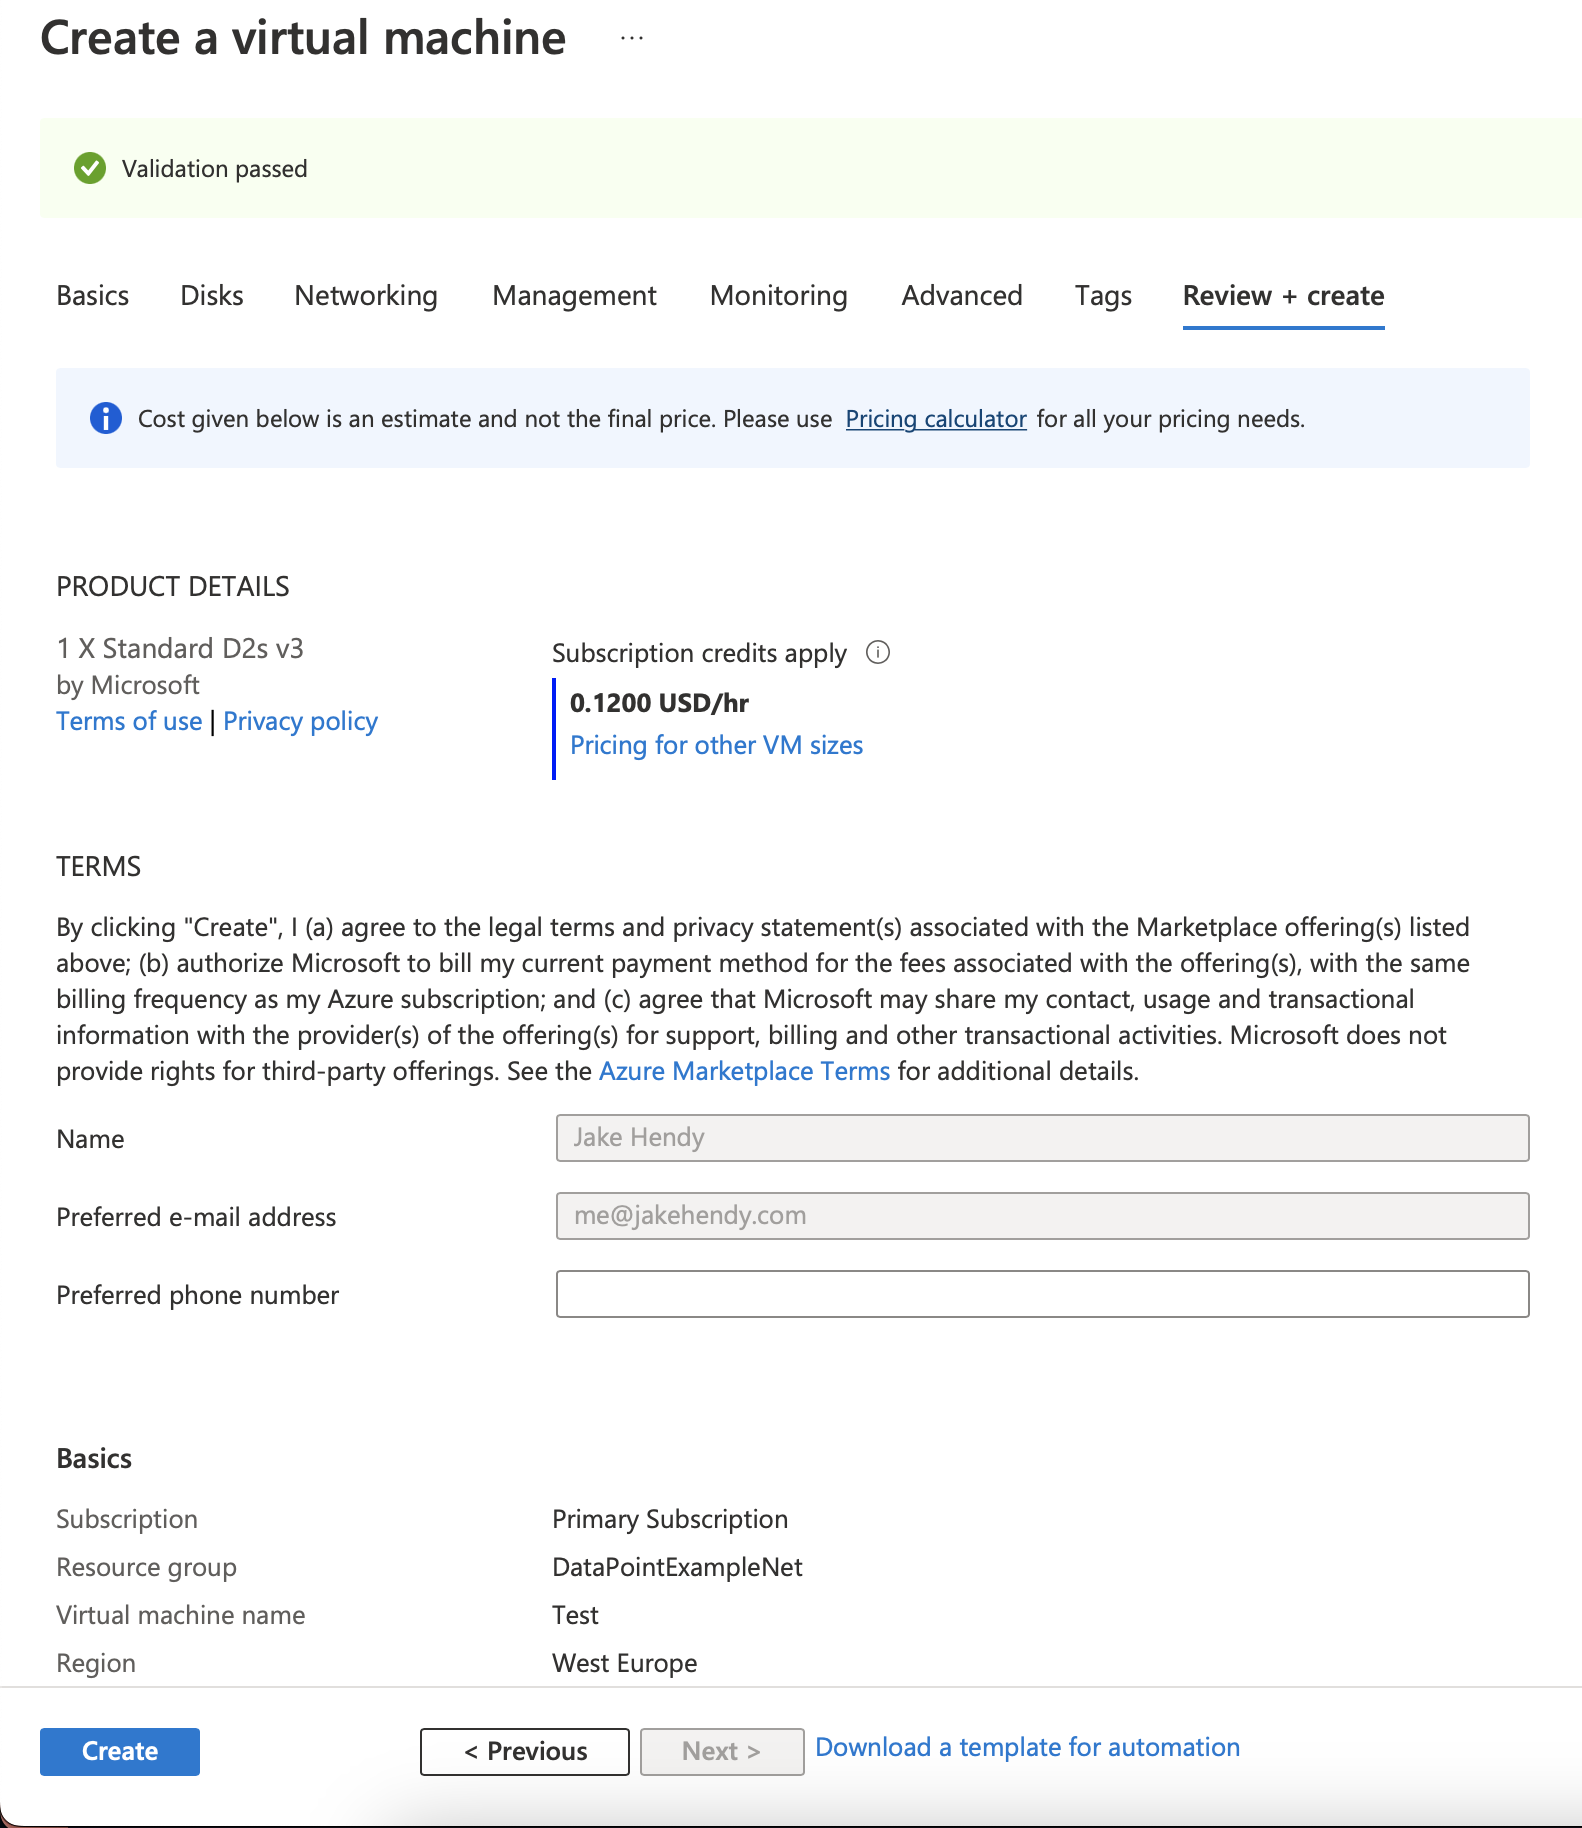 The end of the Azure Virtual Machine Creation wizard, with an option to view the template